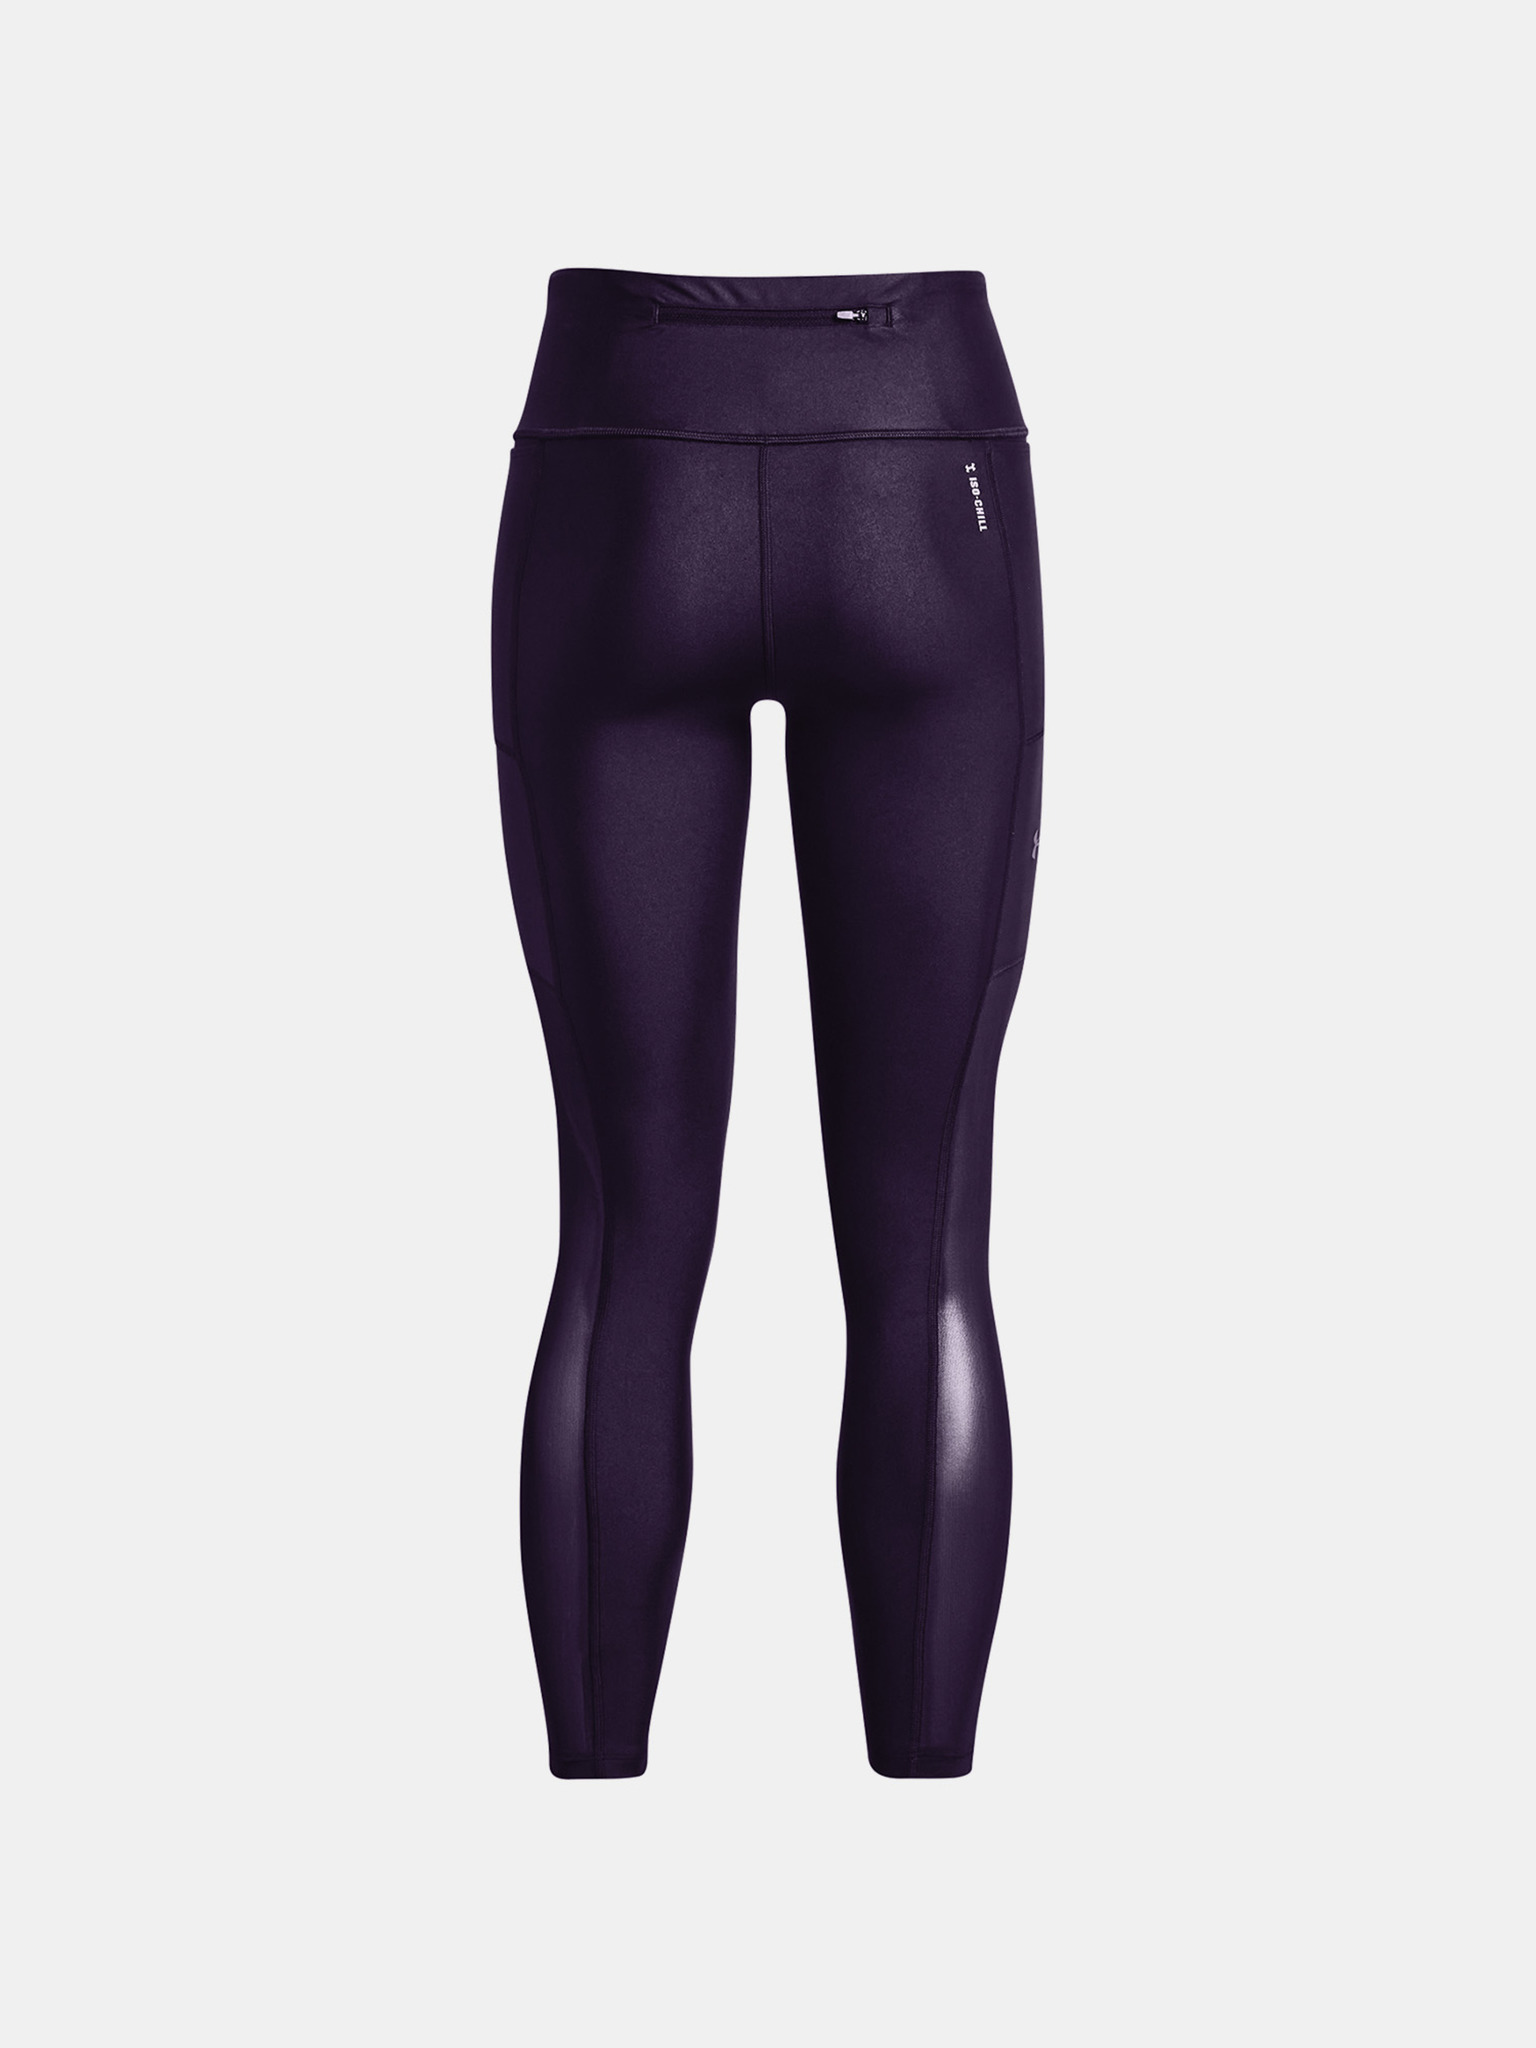 Under Armour FlyFast Iso-Chill Women's Running Tights - Black